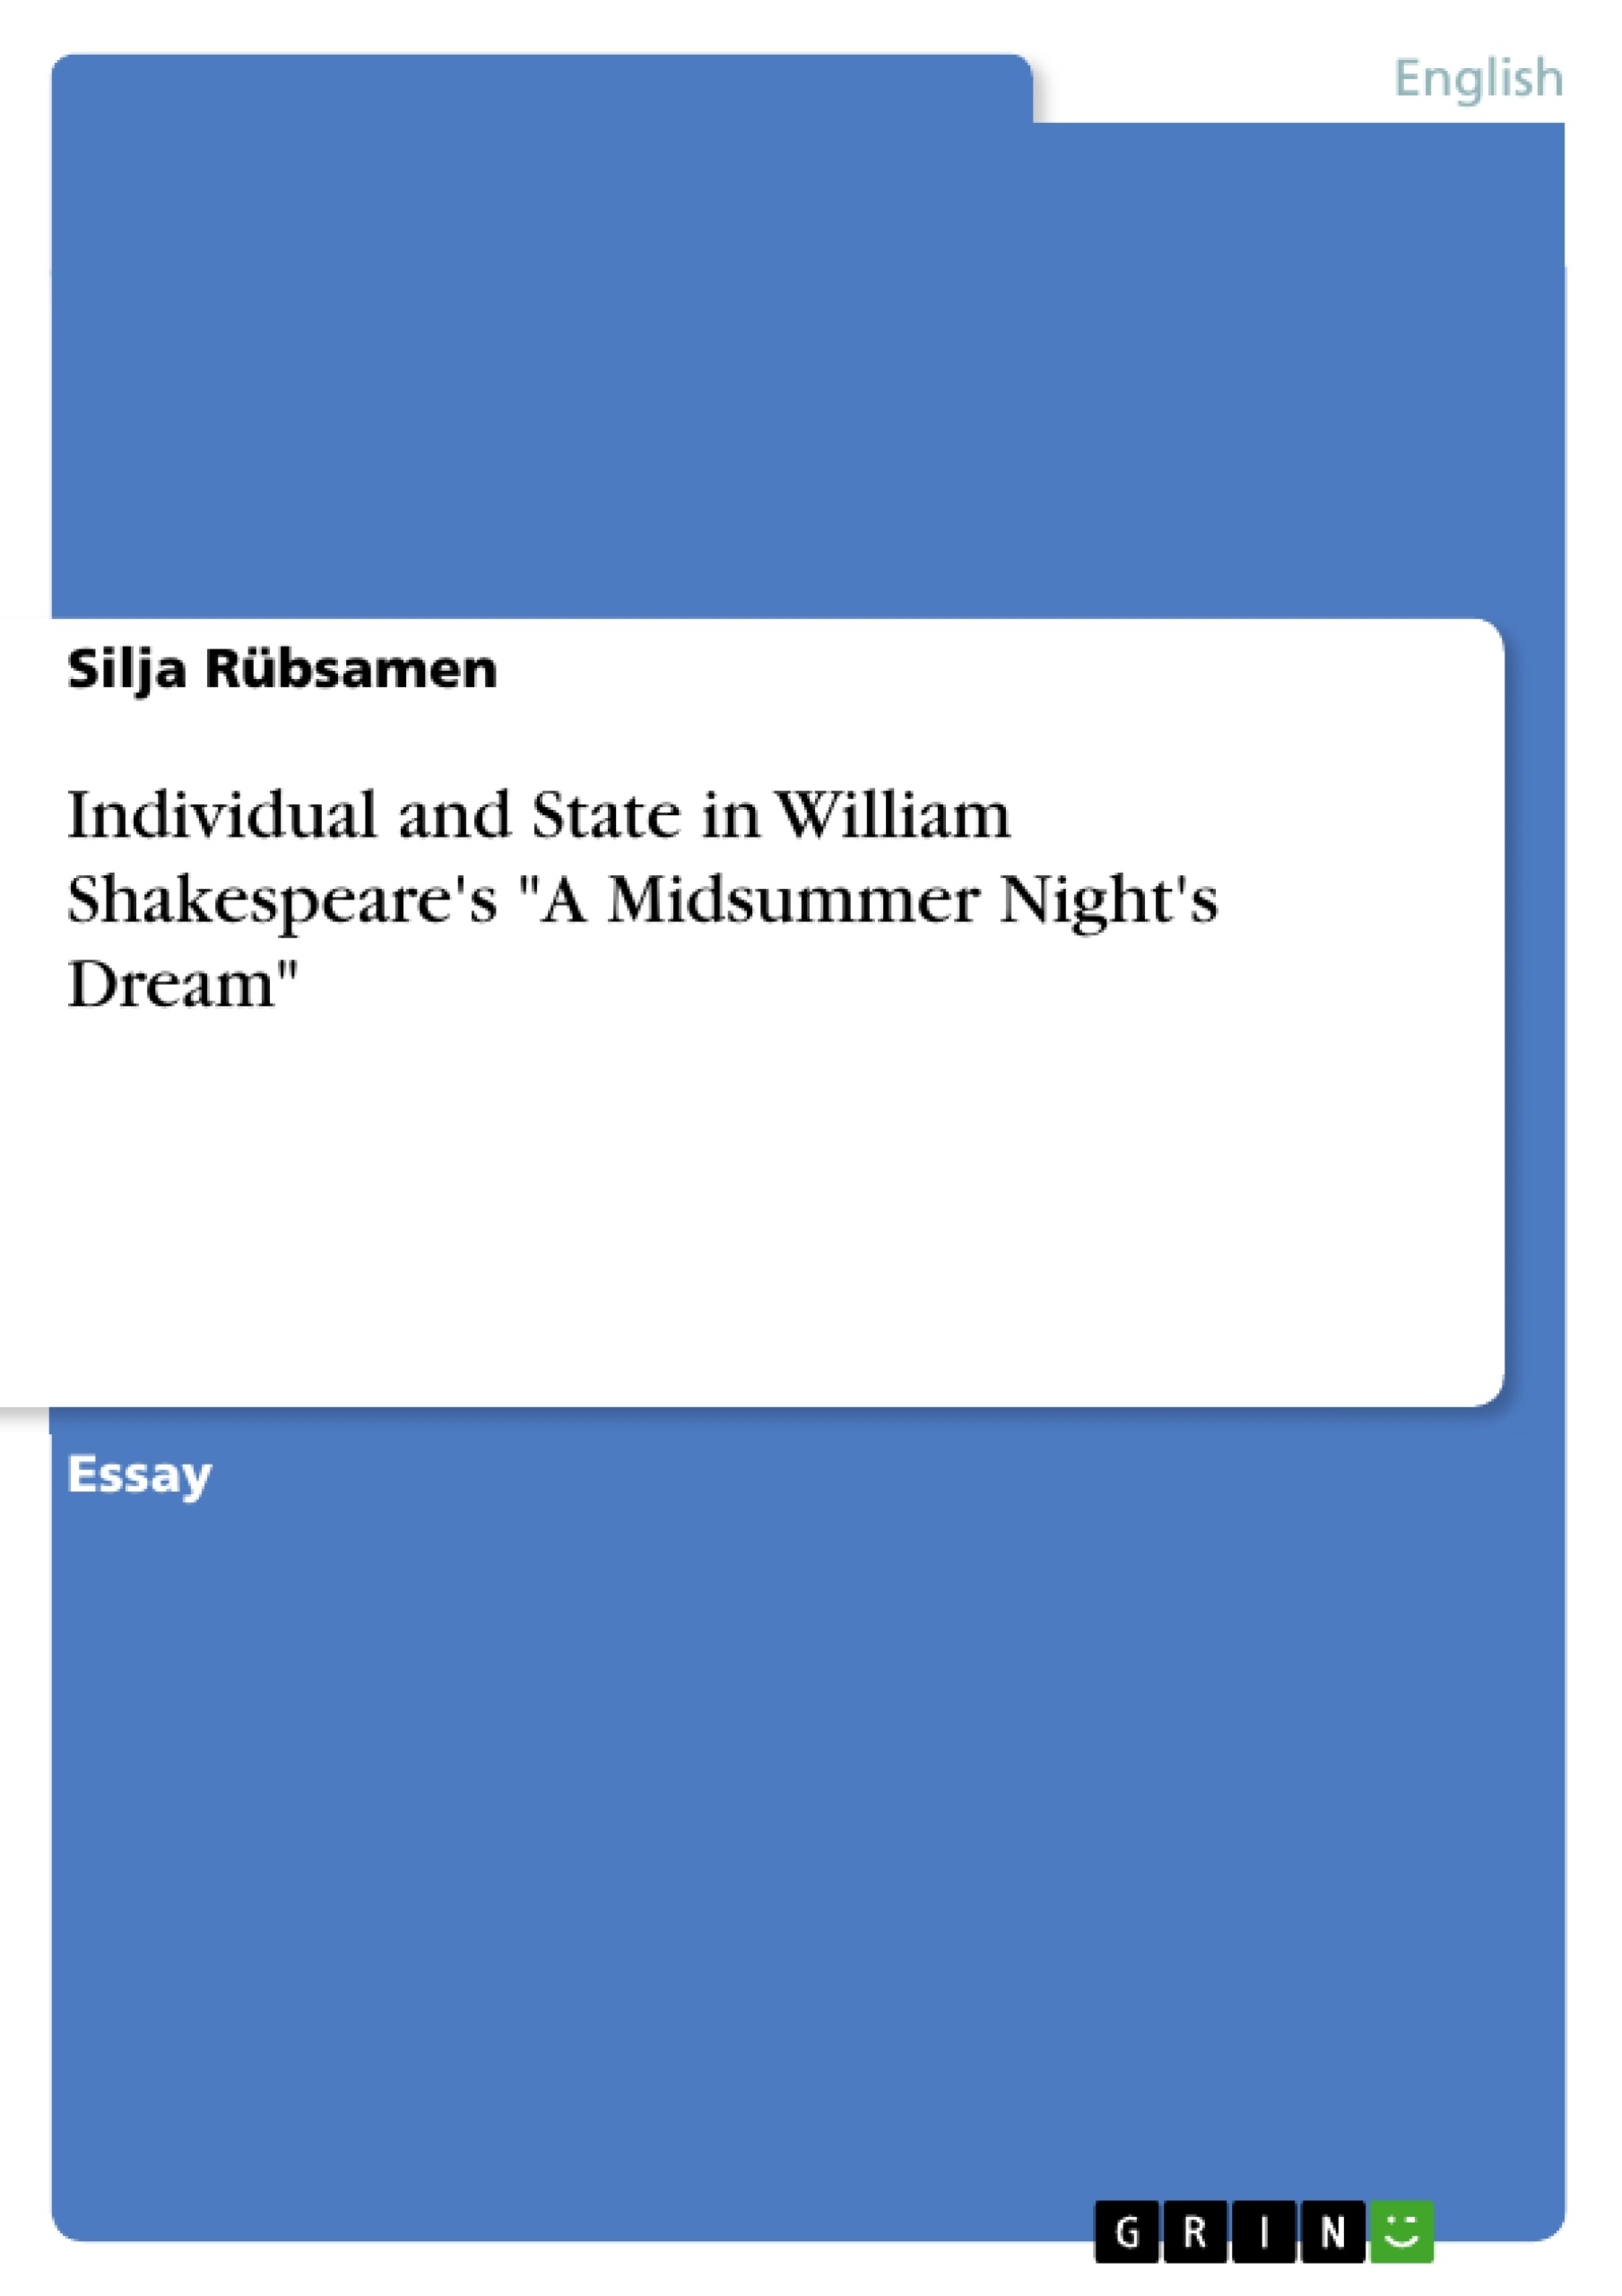 Titre: Individual and State in William Shakespeare's "A Midsummer Night's Dream"